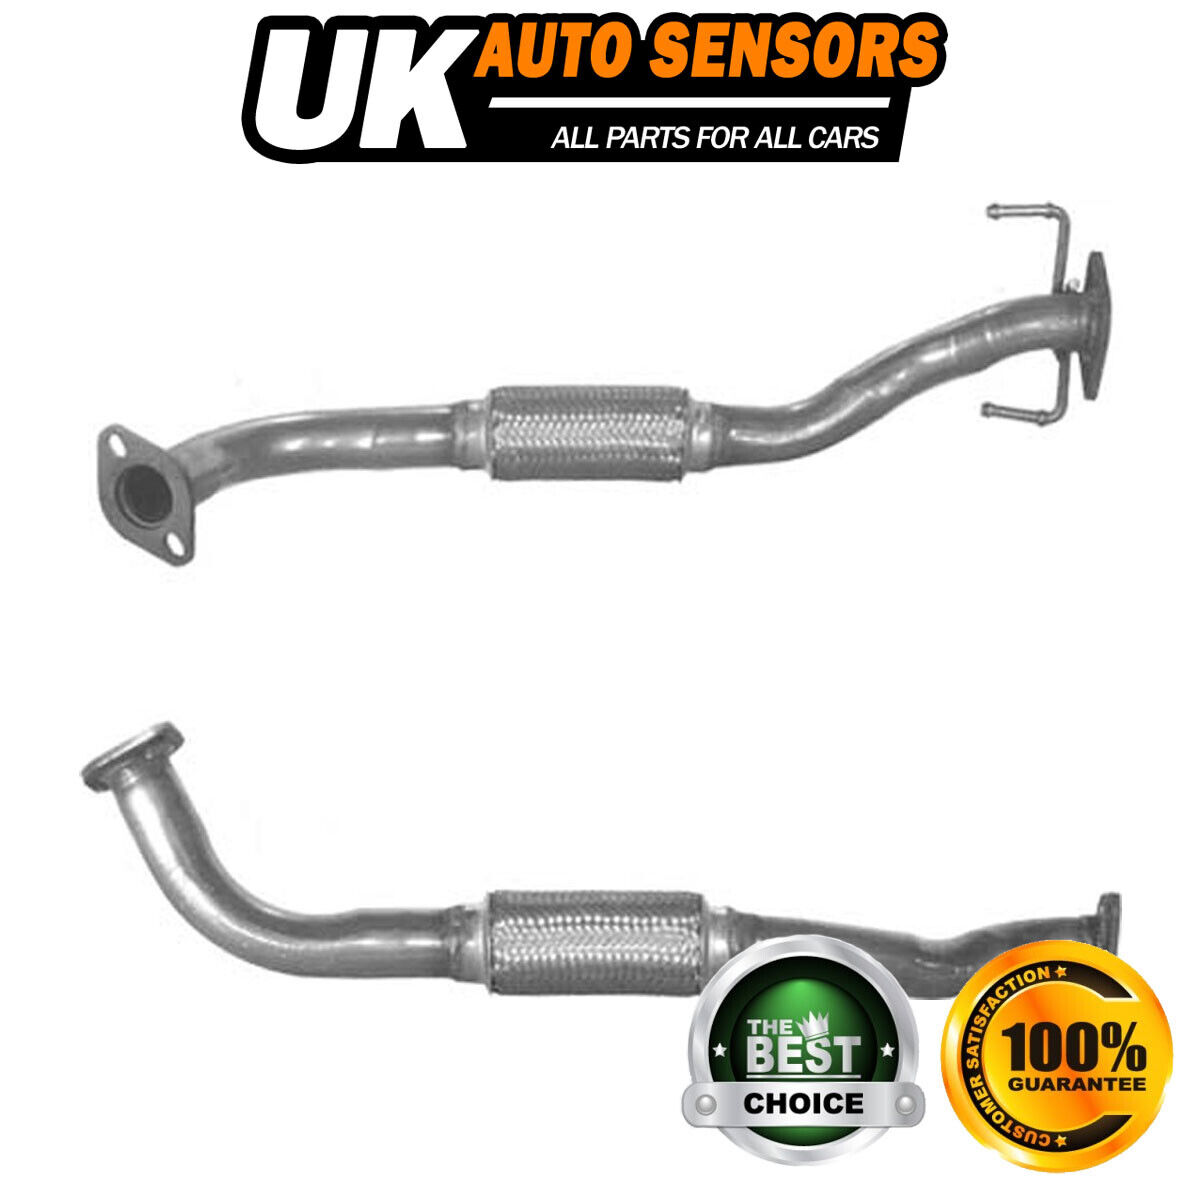 Fits Proton Wira 1997-1999 2.0 TD Exhaust Pipe Euro 2 Front AST MB906134